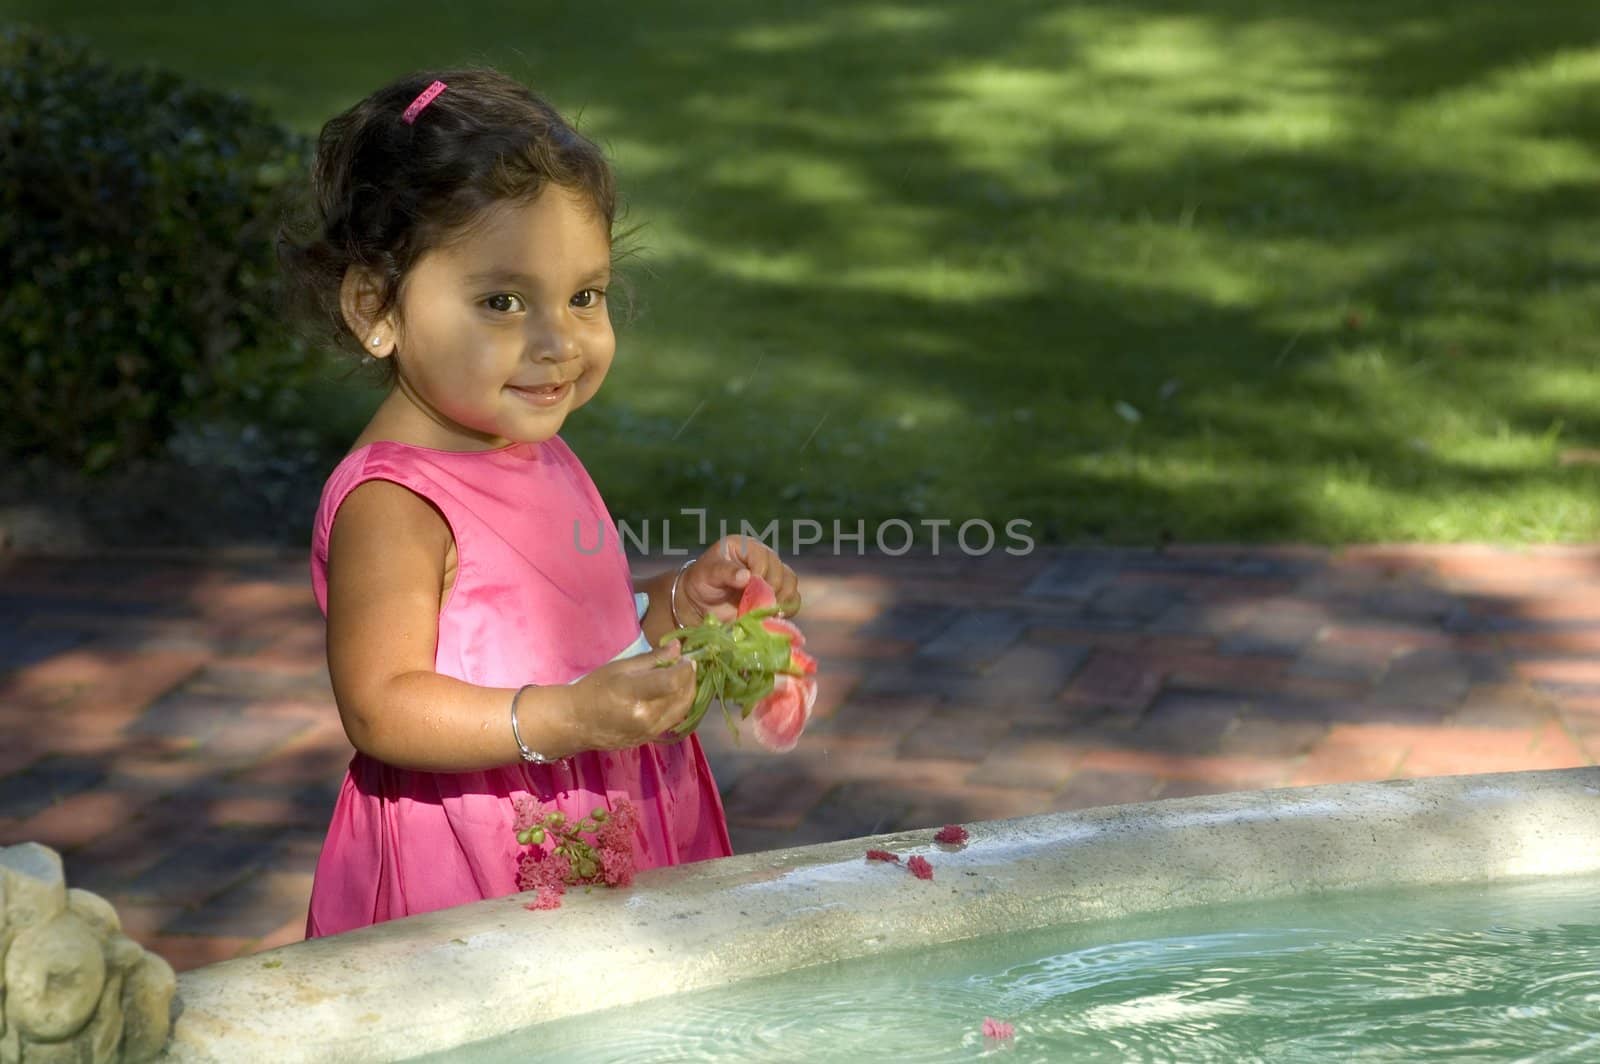 A little Indian girl plays in a fountain.